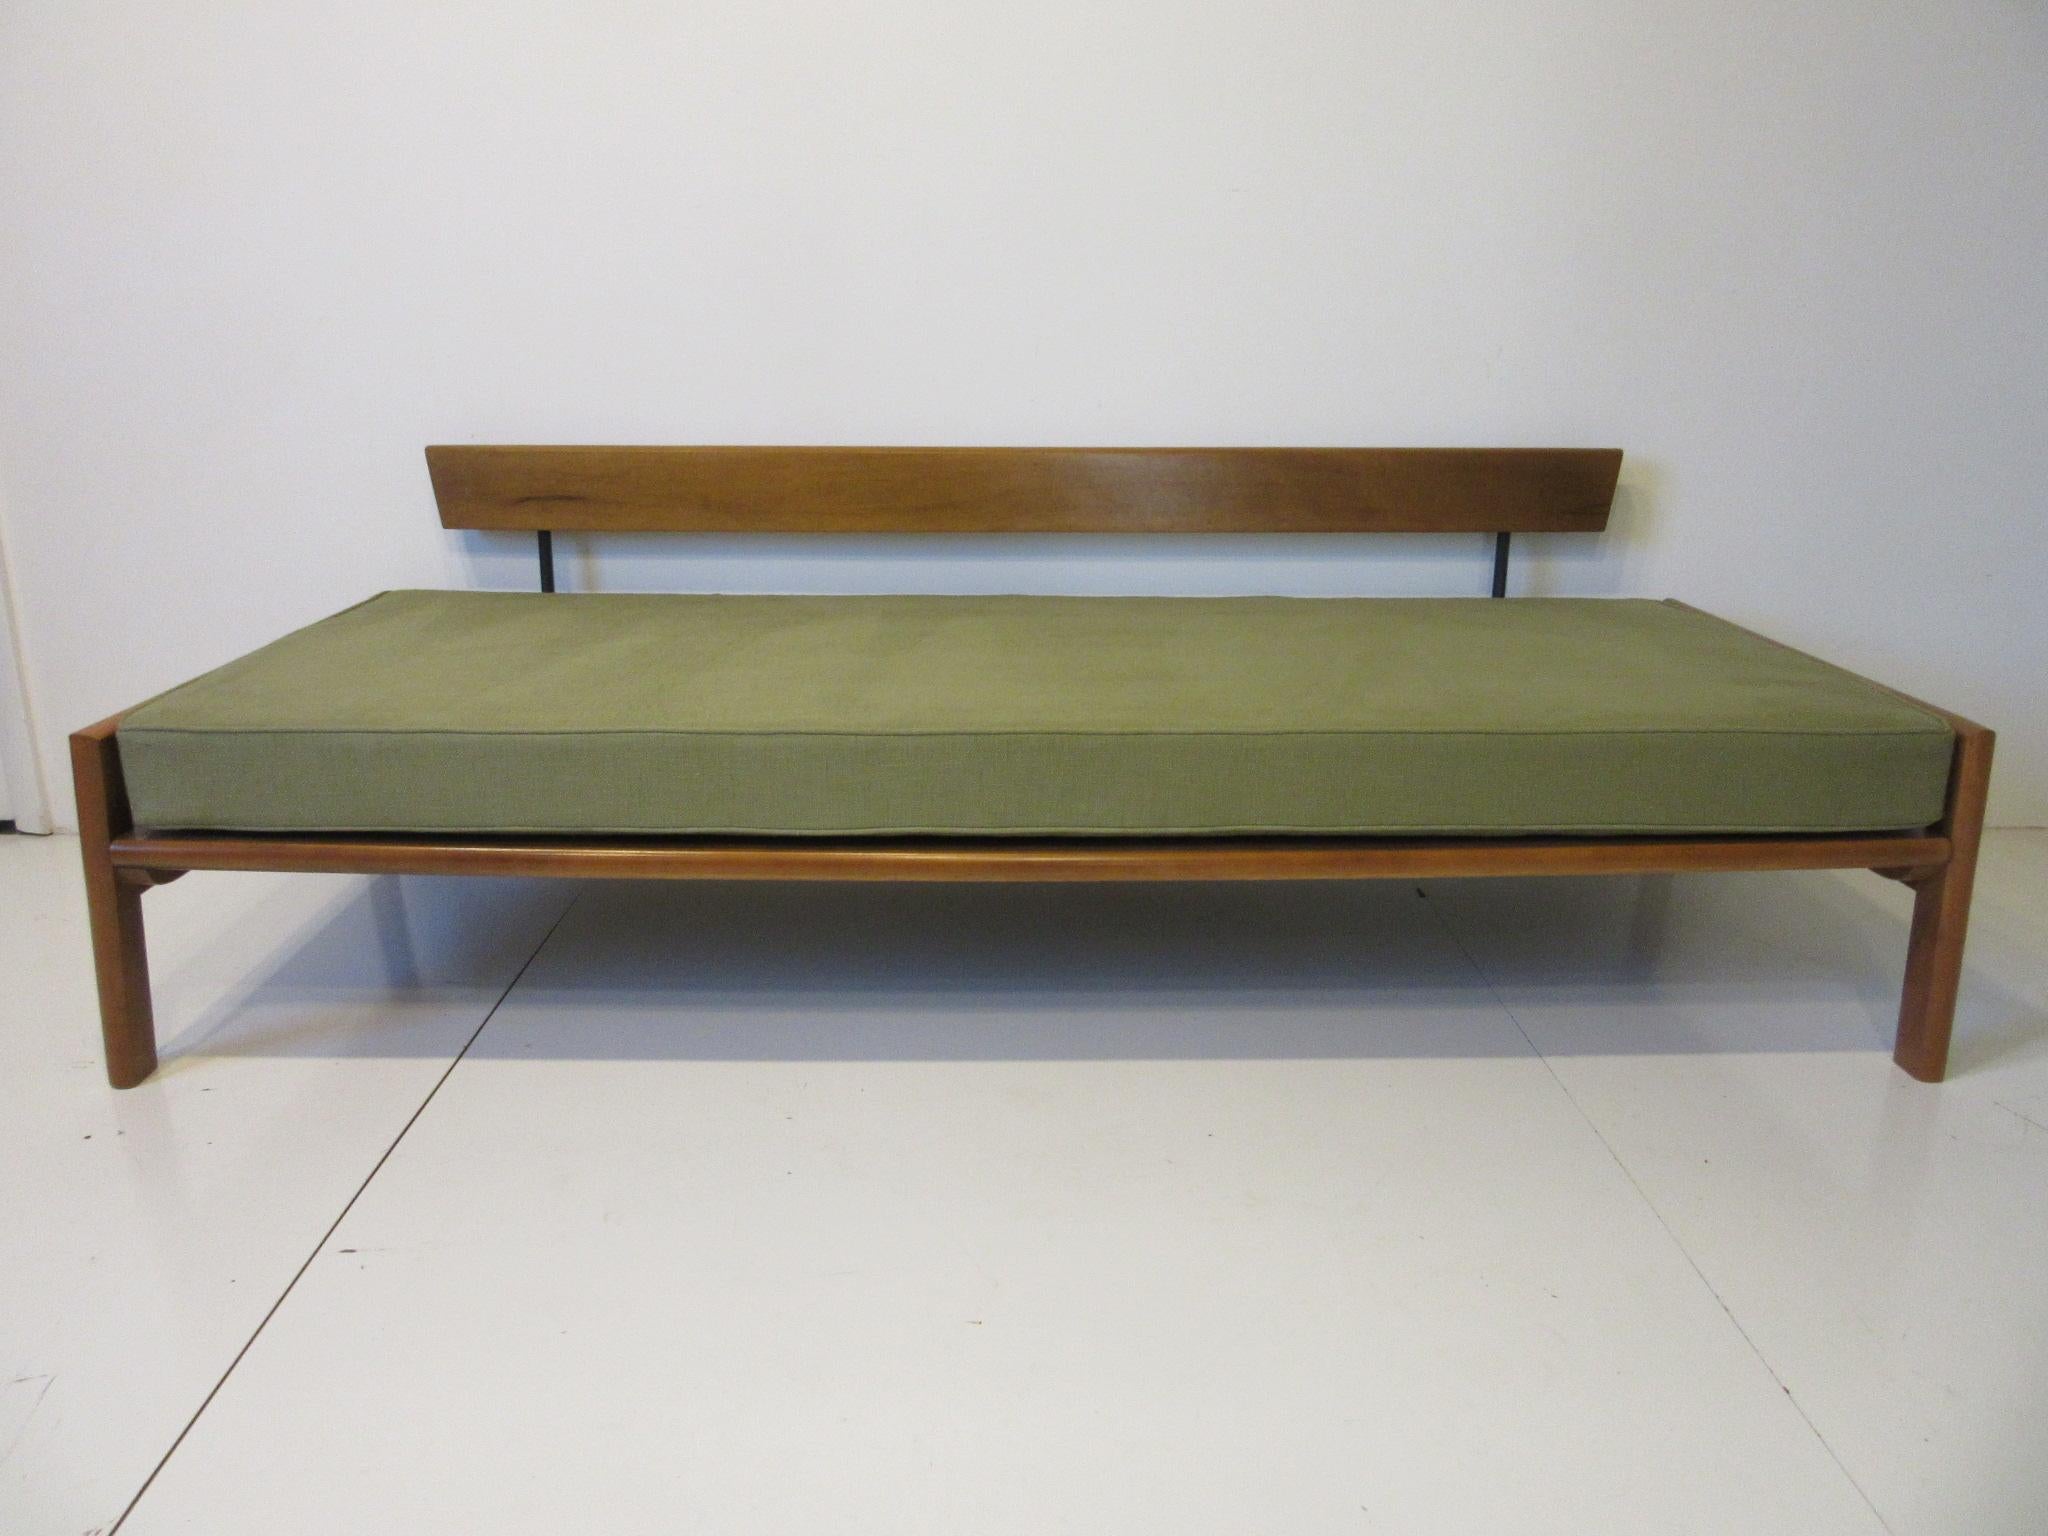 A well constructed solid maple sofa / daybed with framed sides to hold the bottom cushion and back support to the rear cushions so it can be placed any where in a room or used as a spare bed for guests. Reupholstered in a celery green woven soft